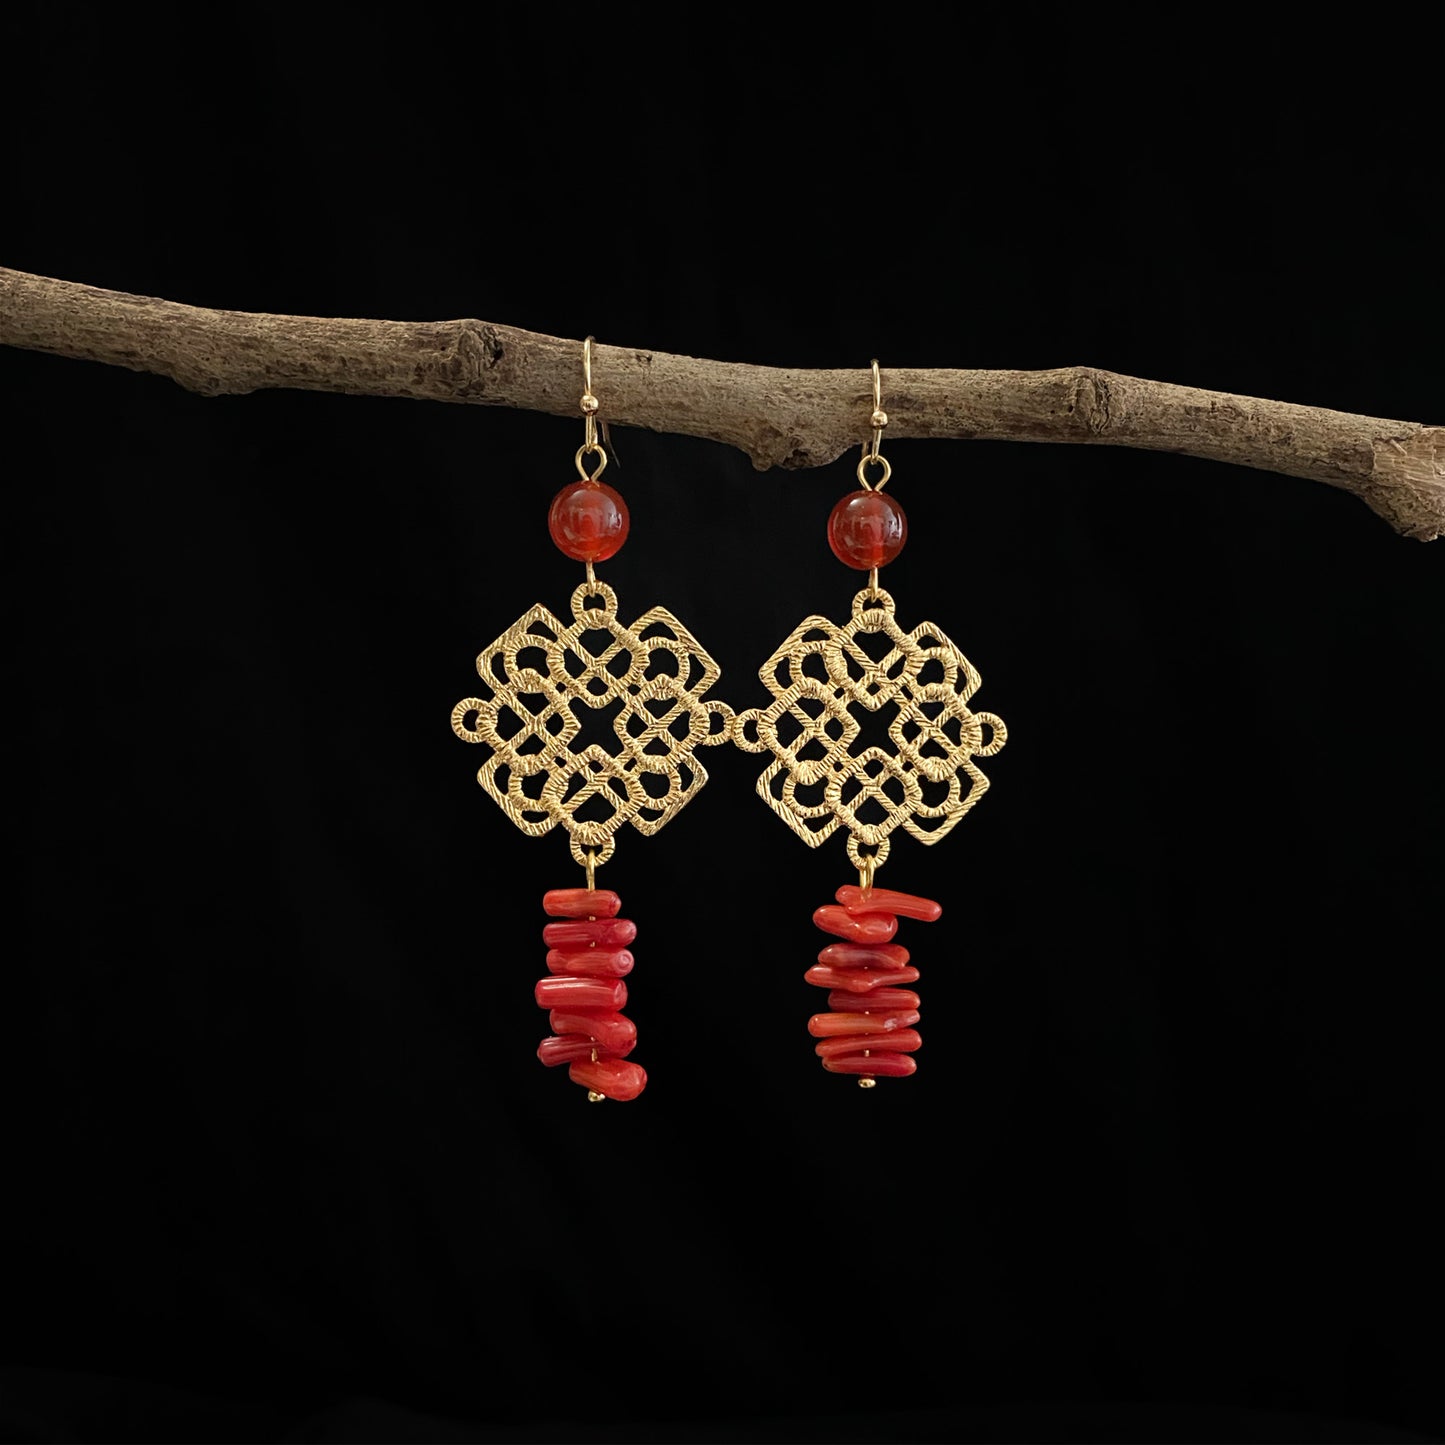 Oriental Motif With Red Agate Crystal Earrings - 14K Real Gold Plated Jewelry